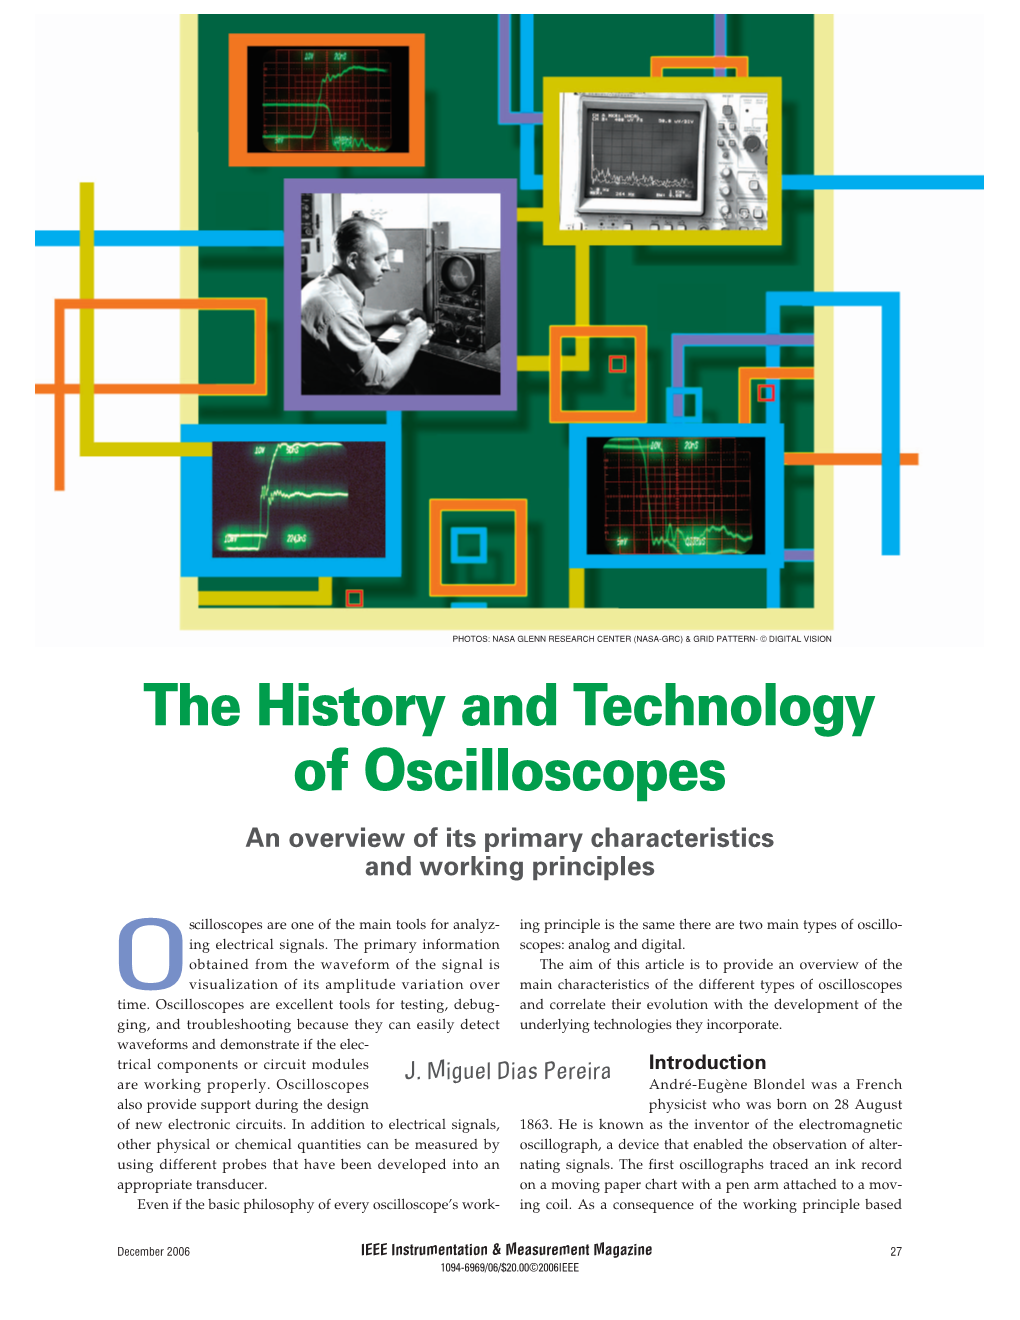 The History and Technology of Oscilloscopes an Overview of Its Primary Characteristics and Working Principles